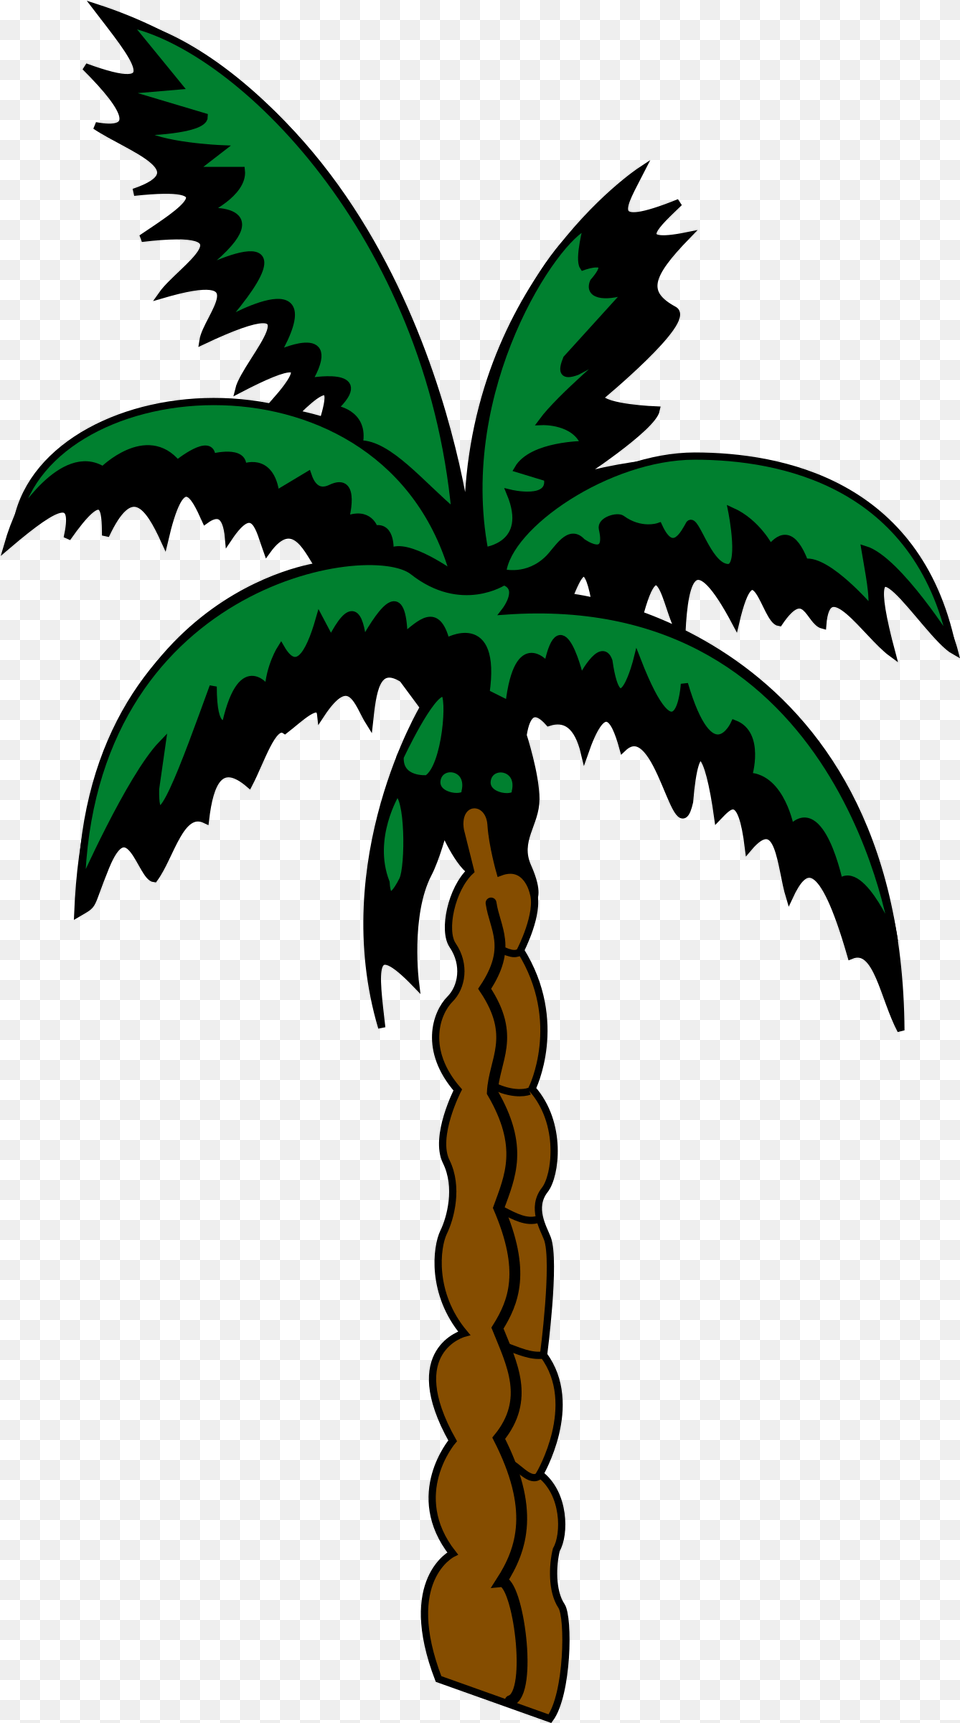 Icons Design Of Palm Tree Suriname Coat Of Arms, Palm Tree, Plant, Cross, Symbol Png Image